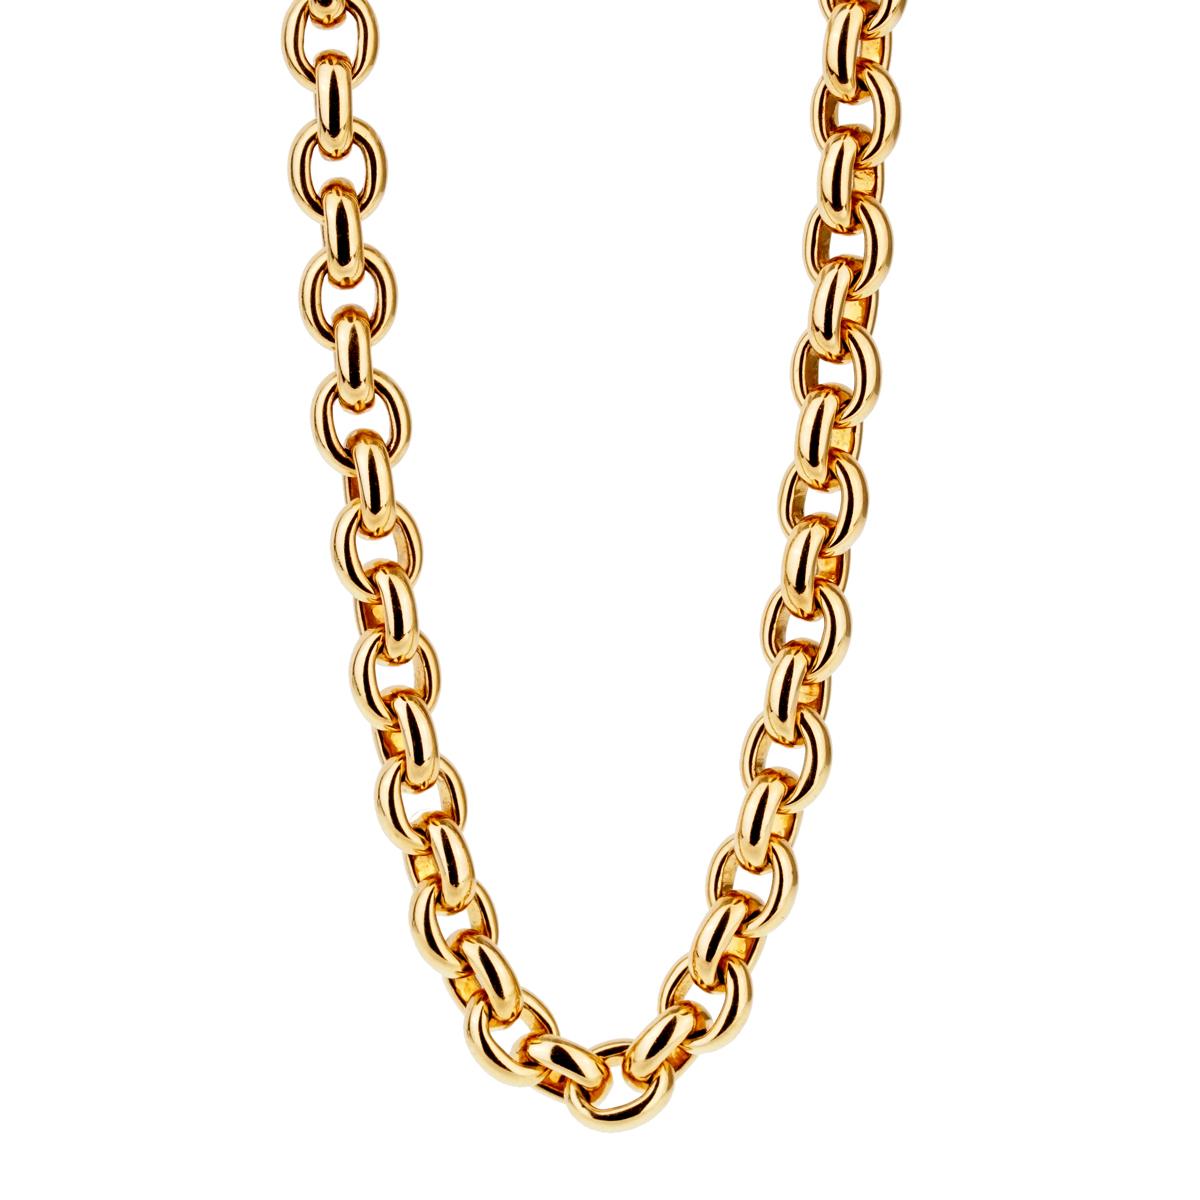 A chic Cartier necklace circa 1991 featuring a chain link in 18k yellow gold. The necklace measures .27